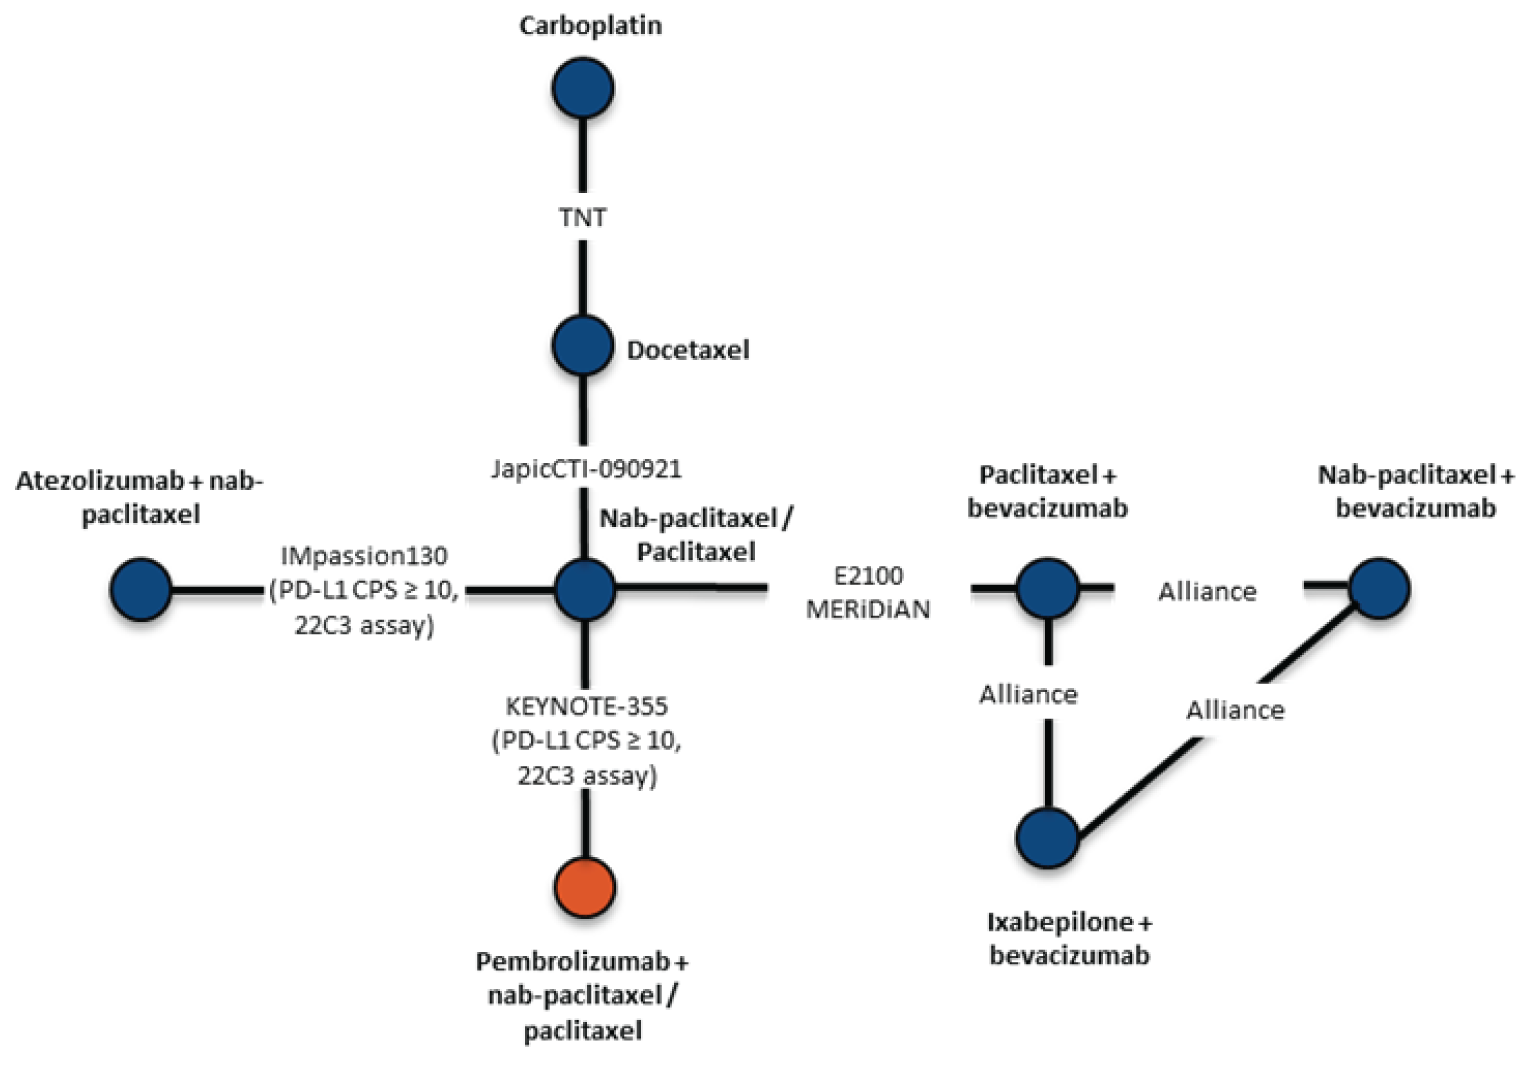 The figure shows the evidence network of all trials included in the network meta-analysis. The network includes carboplatin, docetaxel, atezolizumab plus nab-paclitaxel, nab-paclitaxel and/or paclitaxel, pembrolizumab plus nab-paclitaxel and/or paclitaxel, paclitaxel plus bevacizumab, nab-paclitaxel plus bevacizumab, and ixabepilone plus bevacizumab, and there is a closed loop formed by paclitaxel plus bevacizumab, nab-paclitaxel plus bevacizumab, and ixabepilone plus bevacizumab.